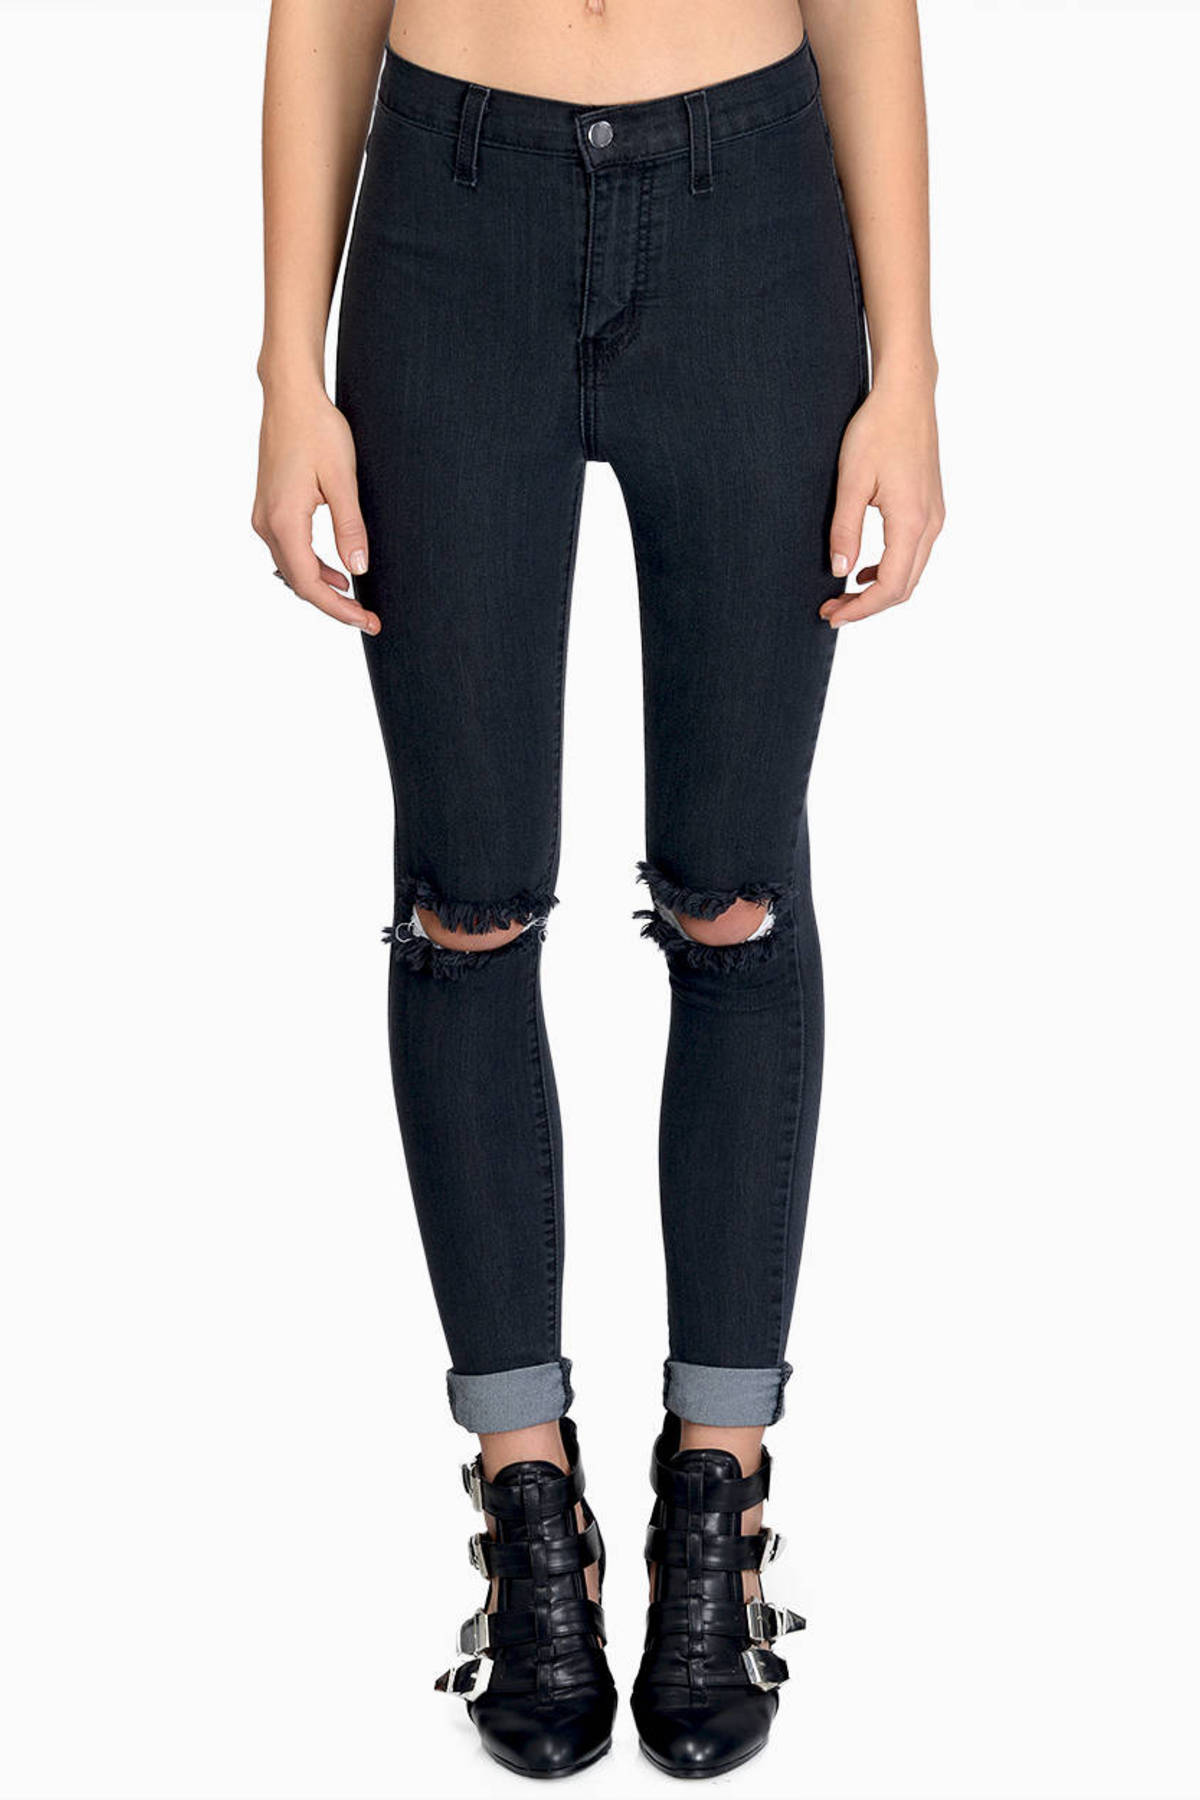 Black Jeans Zipfly Closure Jeans Jeans With Two Back Pockets